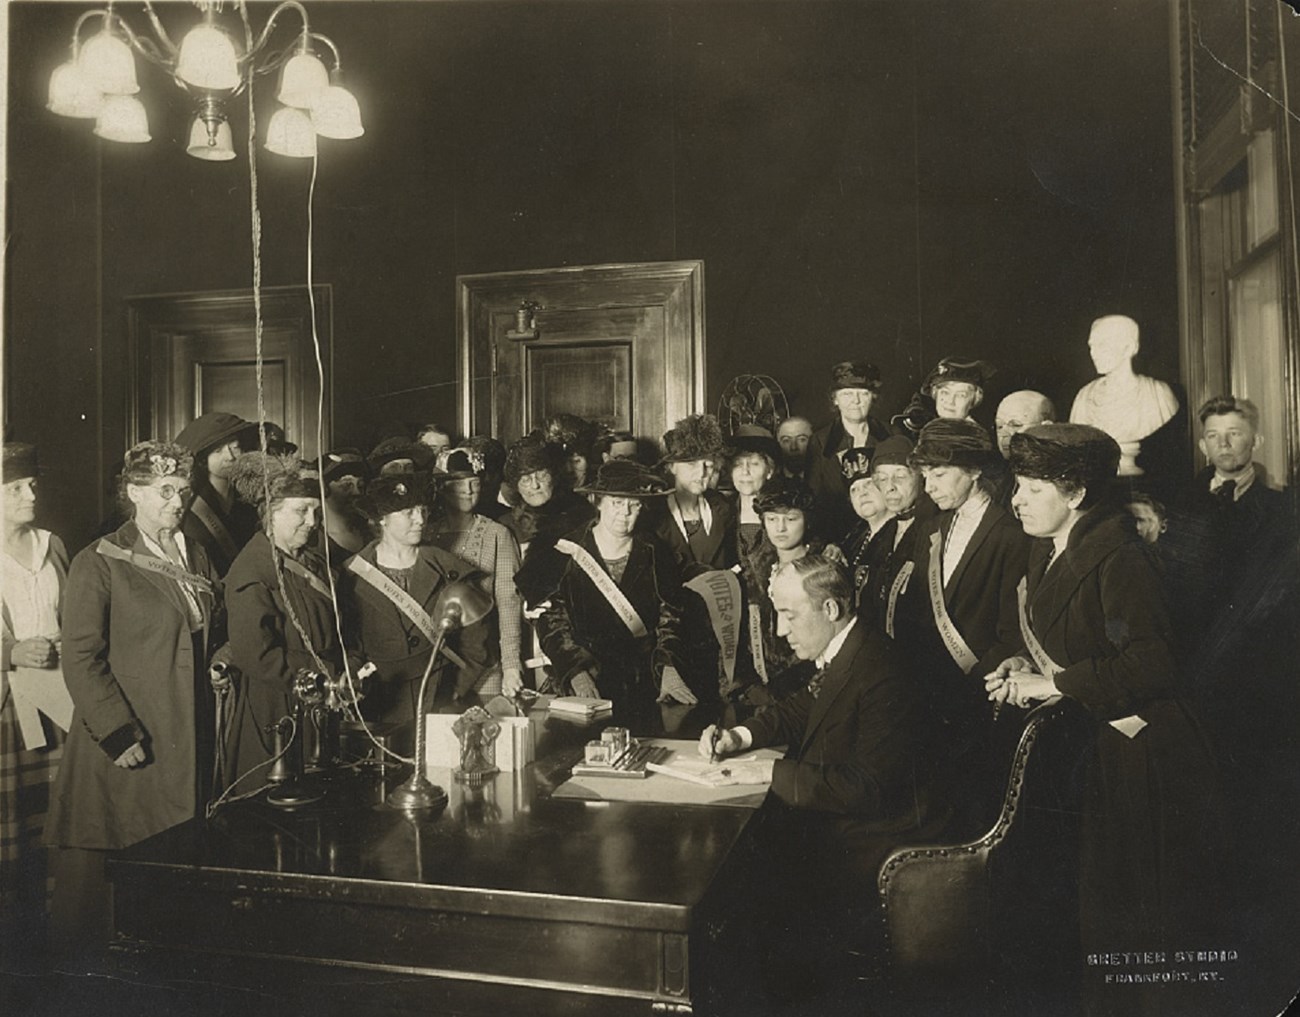 Kentucky Governor Edwin P. Morrow signing the 19th Amendment. Kentucky became the 24th state to ratify the amendment. Library of Congress.